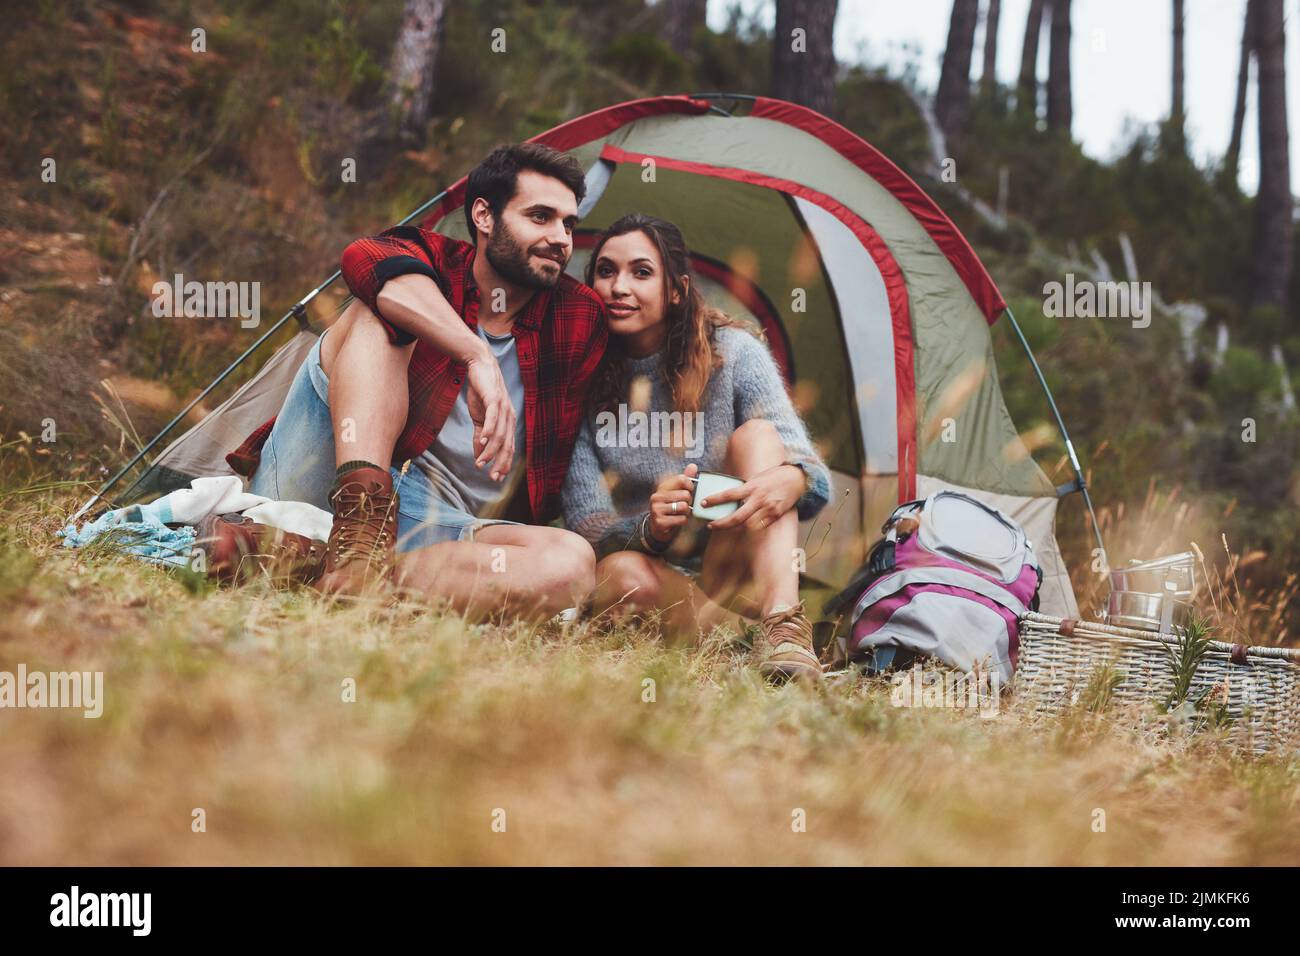 Loving young couple bonding on a camping holiday. Couple sitting together in front of their tent. Stock Photo